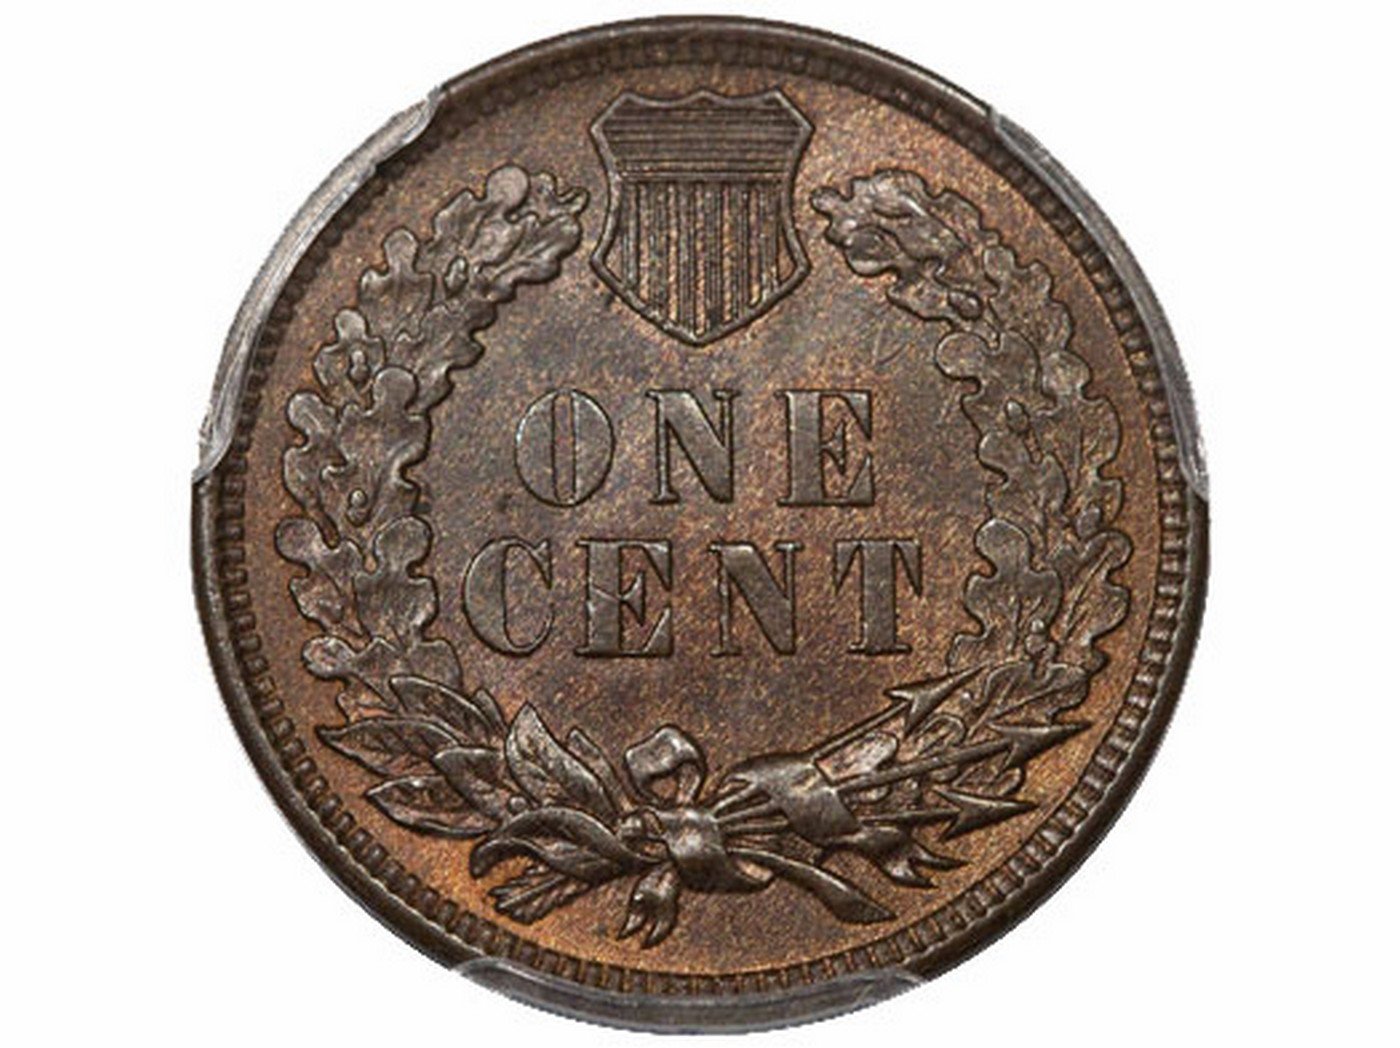 1906 Reverse of RPD-018 - Indian Head Penny - Photo by David Poliquin